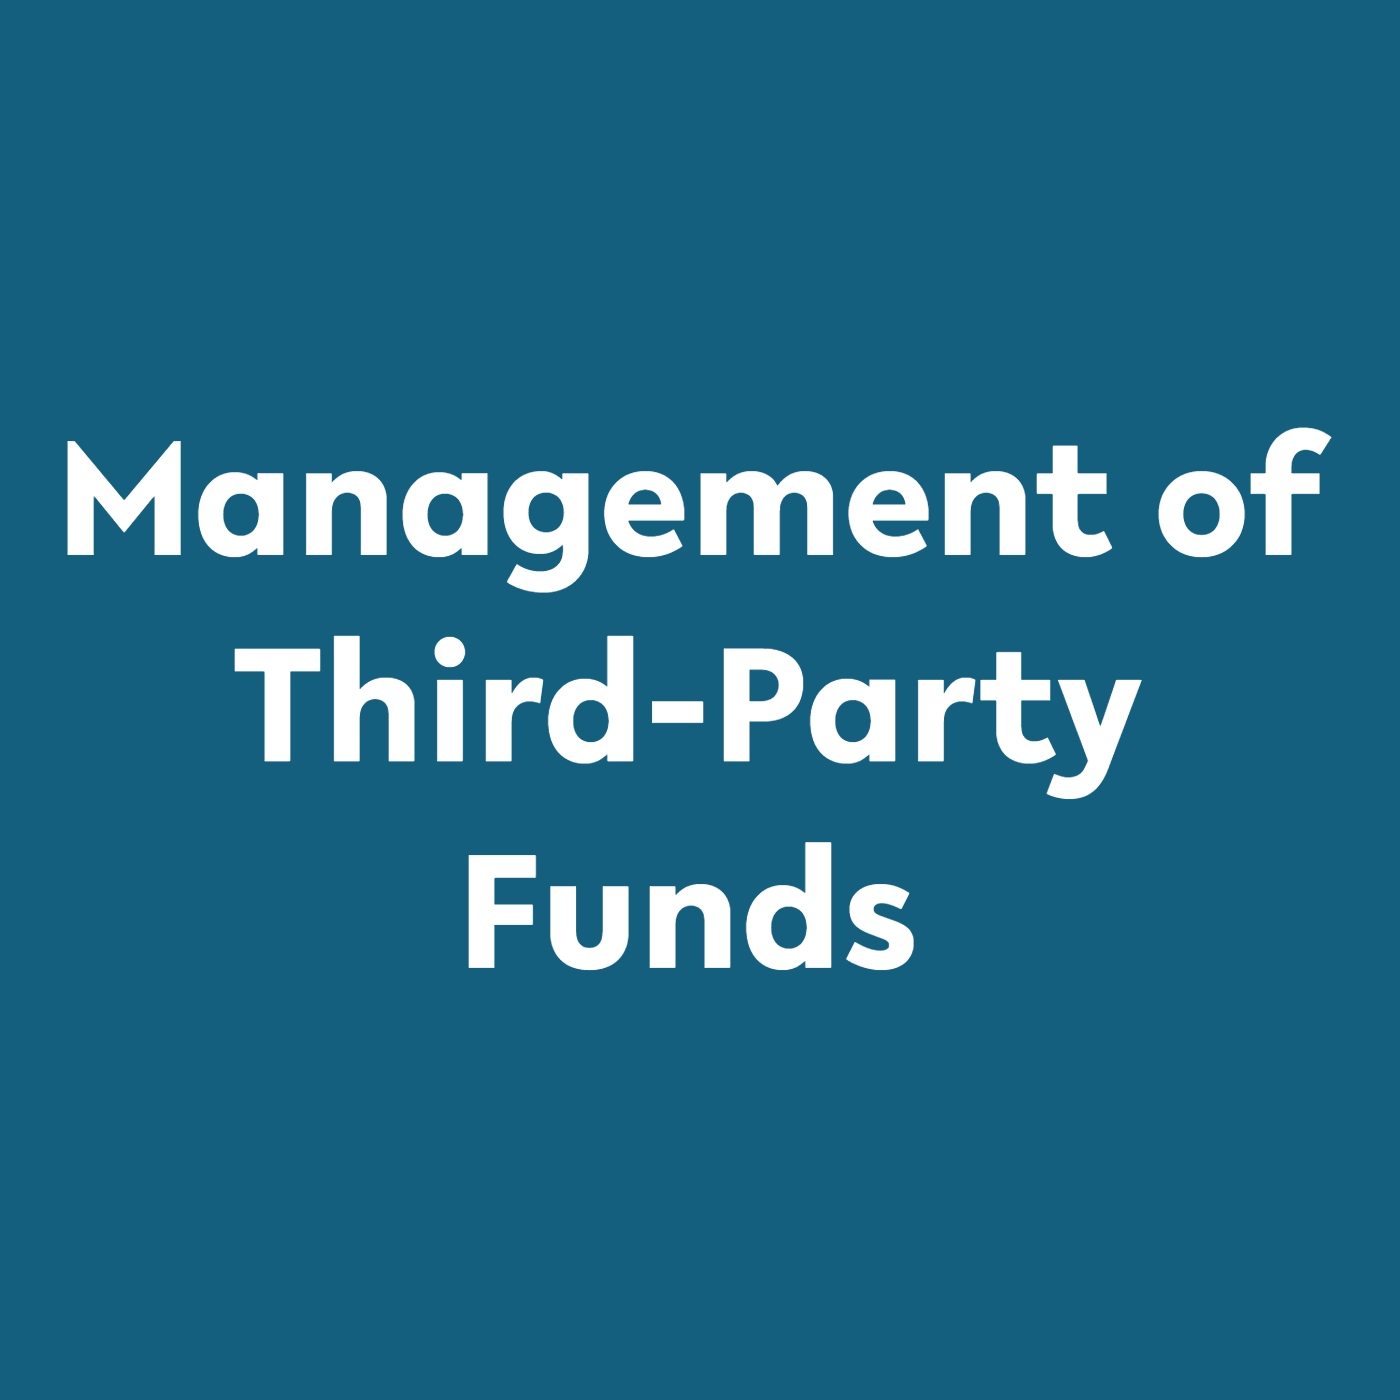 Blue box with text Management of Third-Party Funds